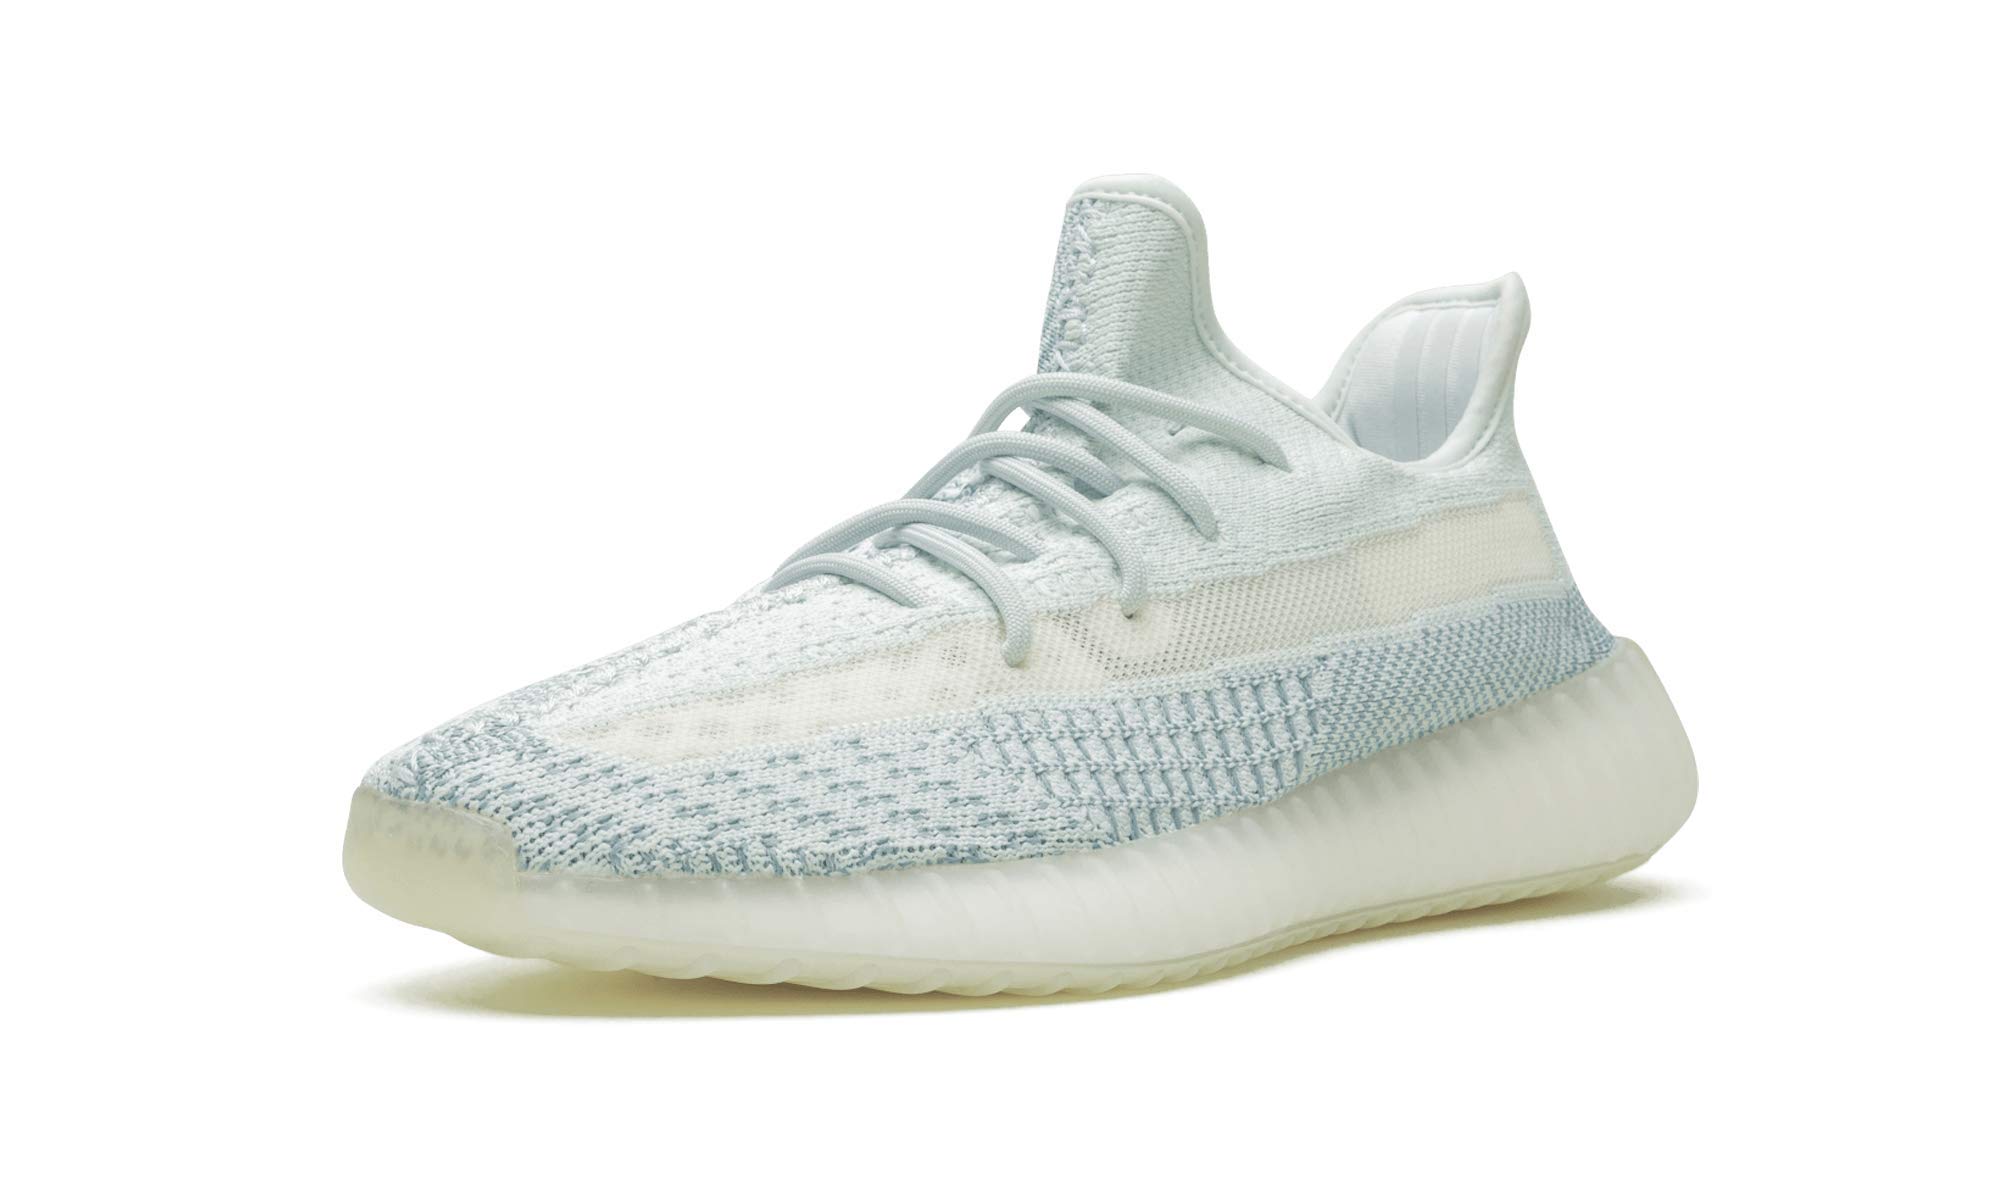 adidas Mens Yeezy Boost 350 V2 Reflective FW5317 Cloud White - Size 5